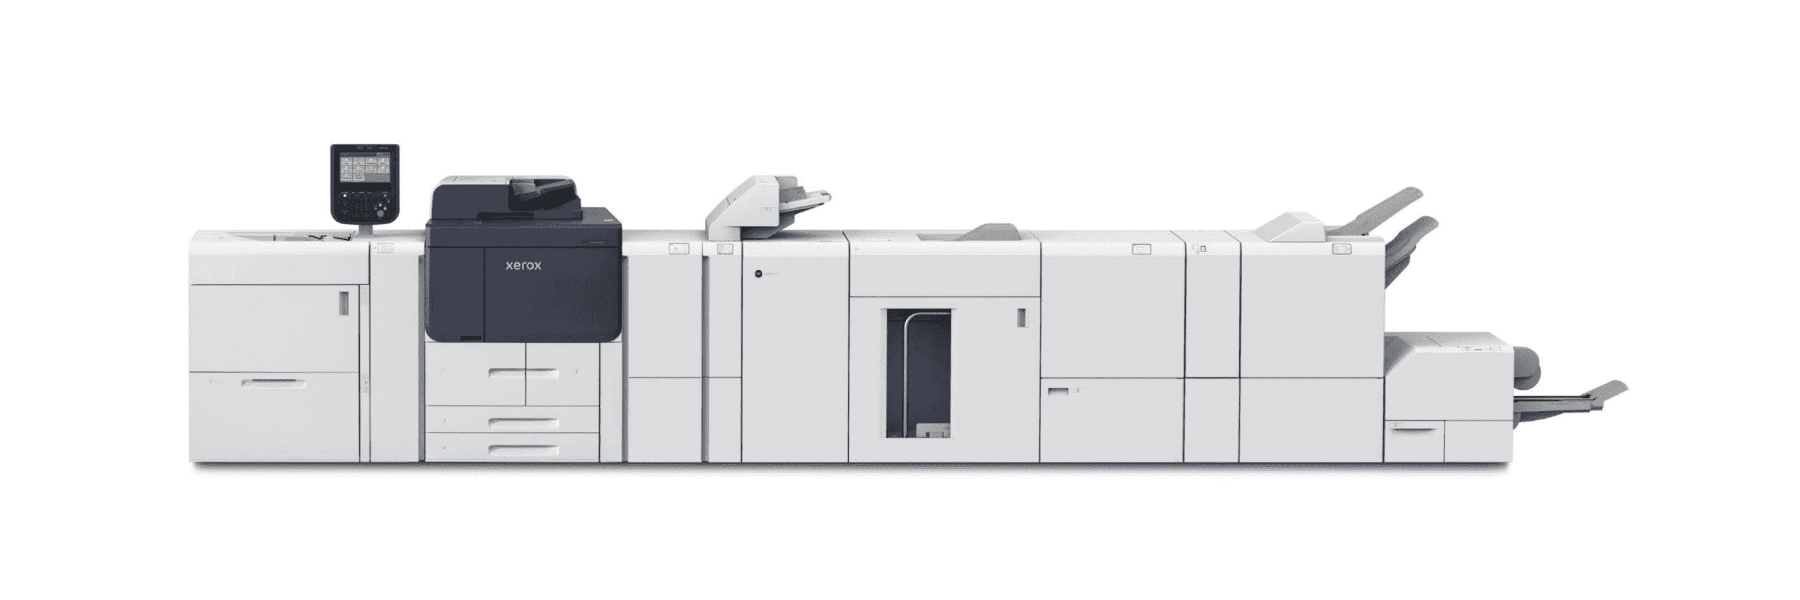 The Xerox PrimeLink B9110 with upgrades and accessories